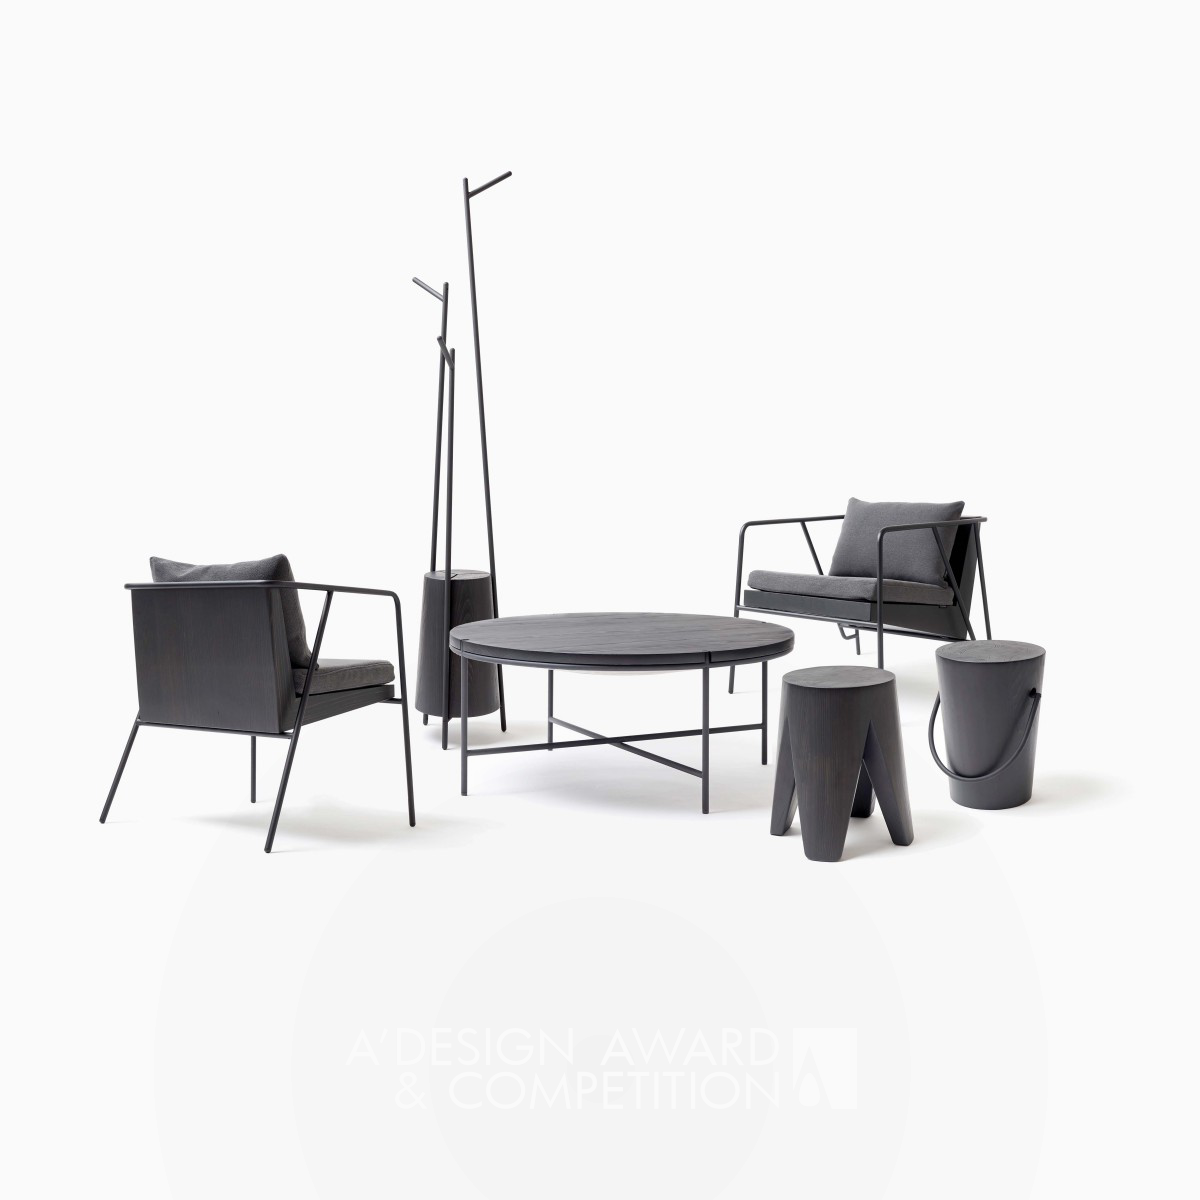 Mass Series Sumi Limited Furniture by CANUCH